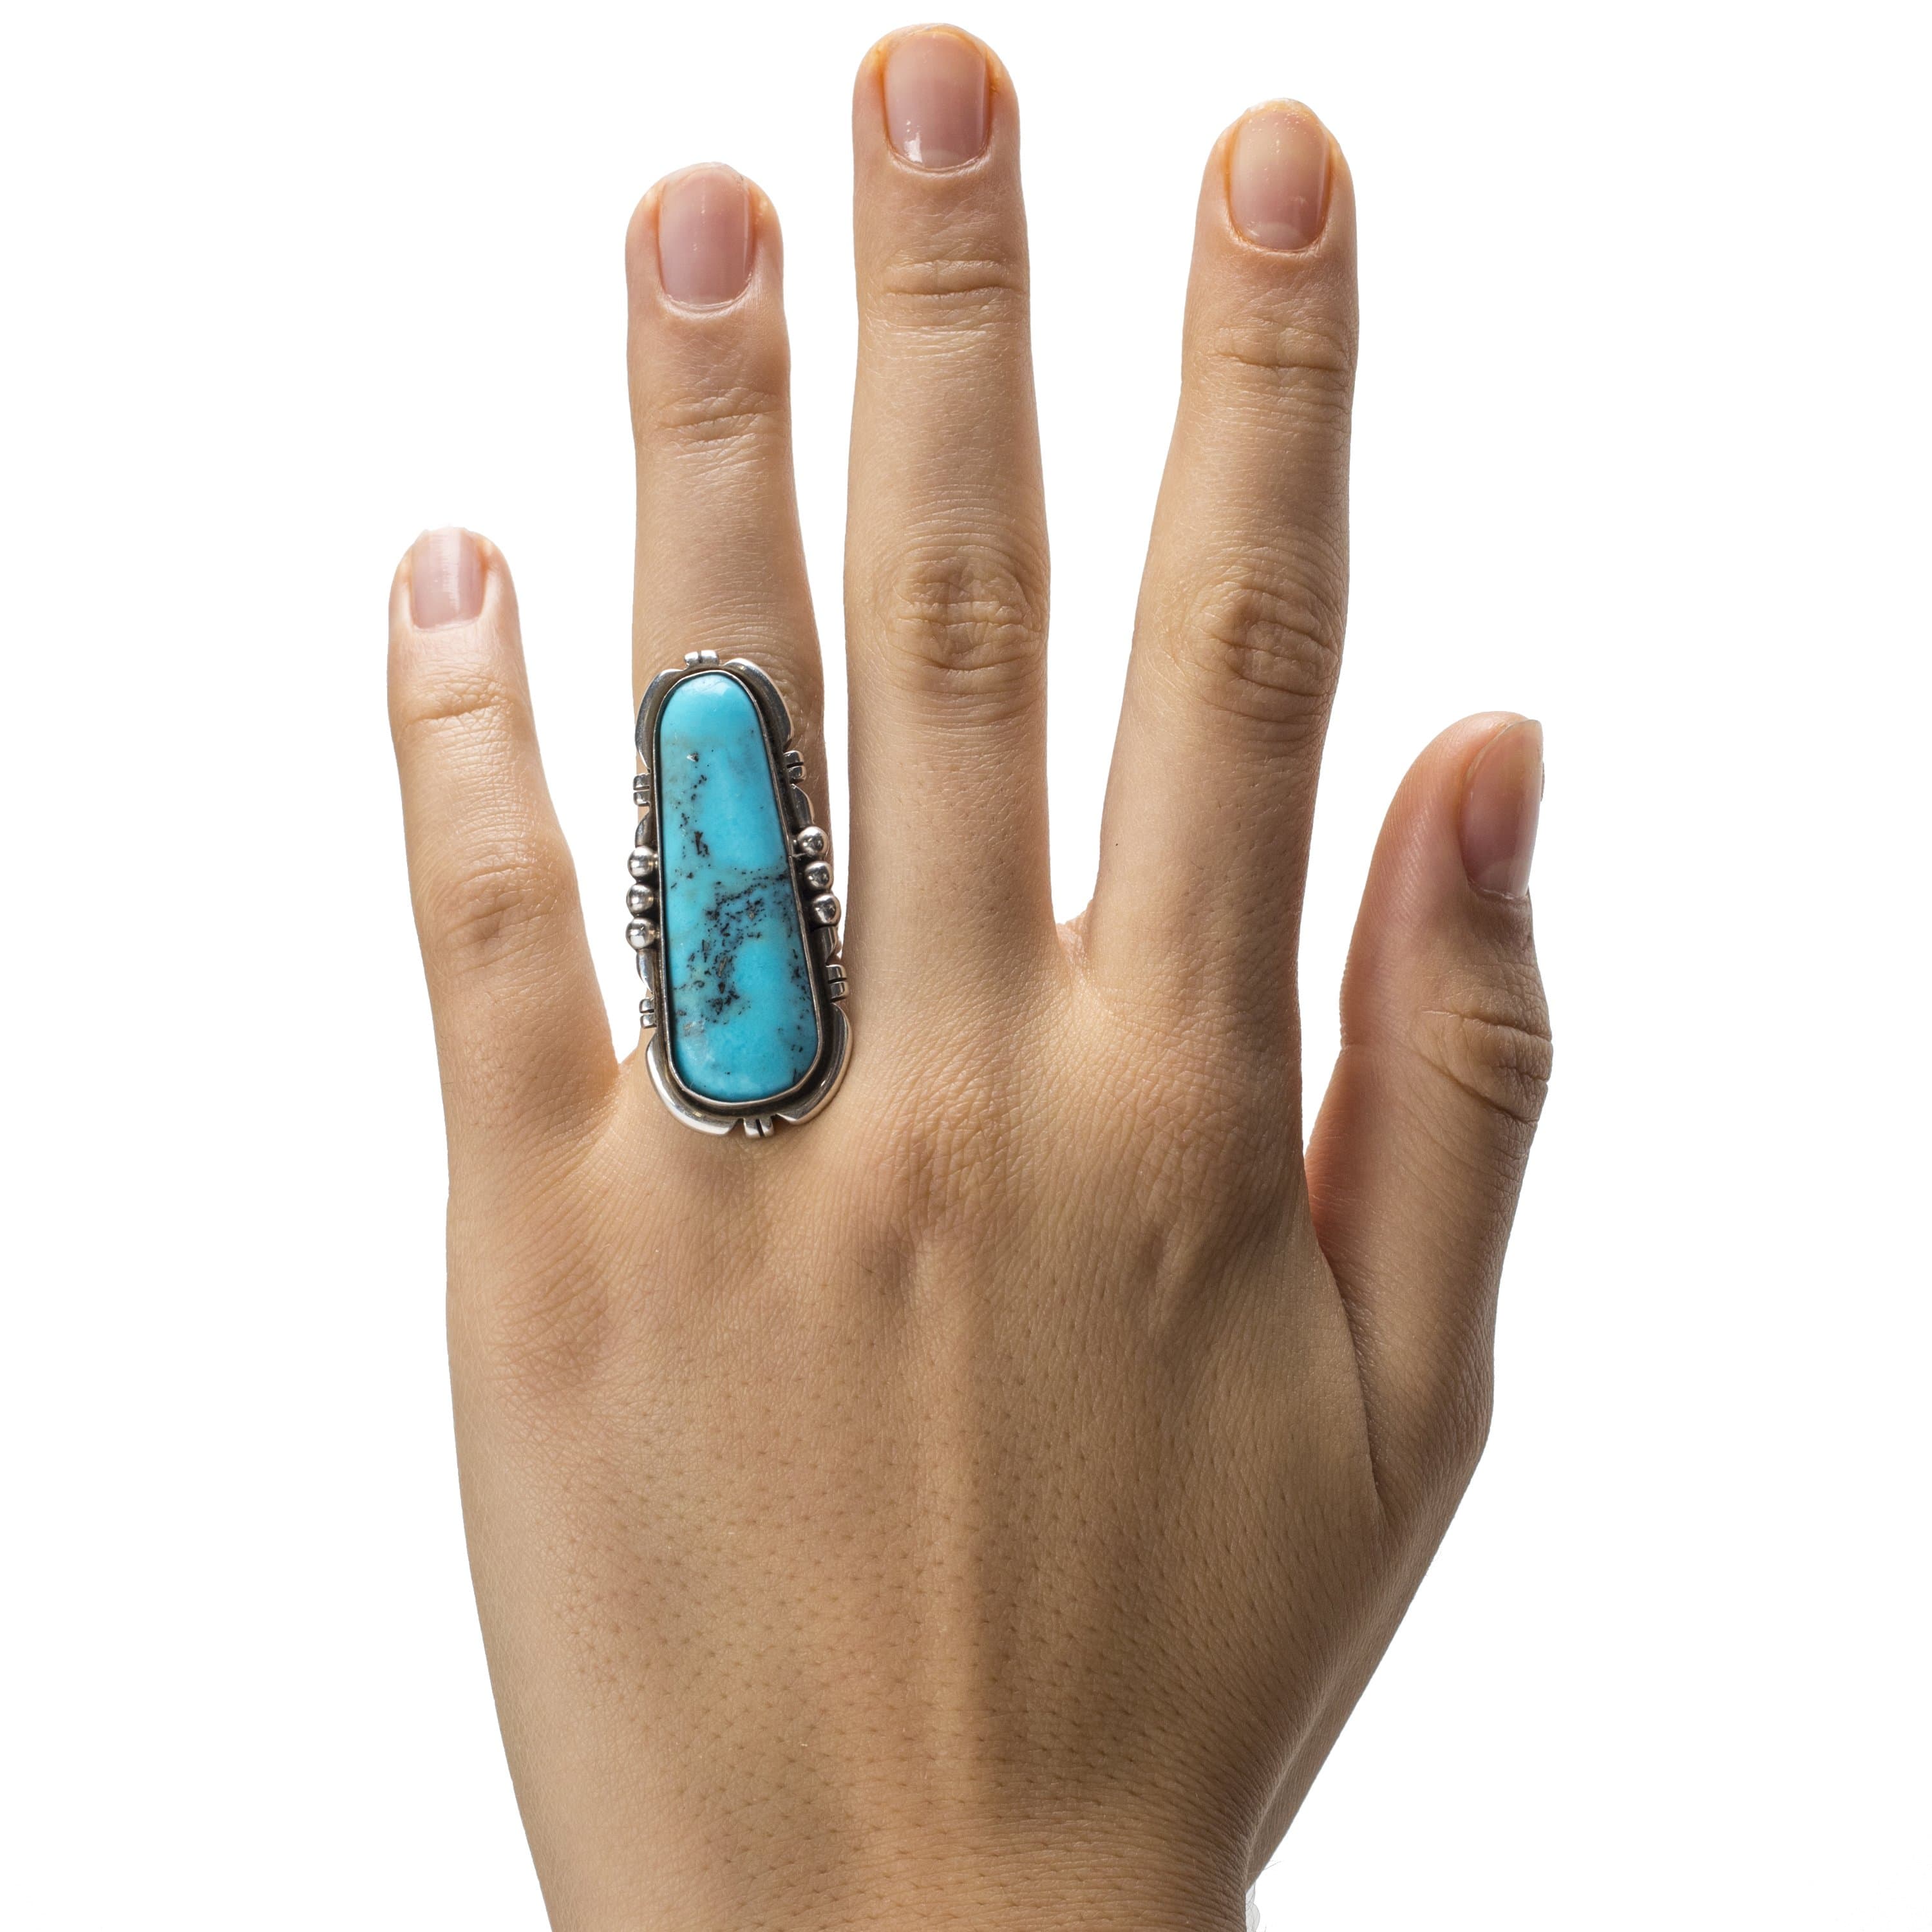 Kalifano Native American Jewelry 5 Kingman Turquoise USA Native American Made 925 Sterling Silver Ring NAR600.024.5